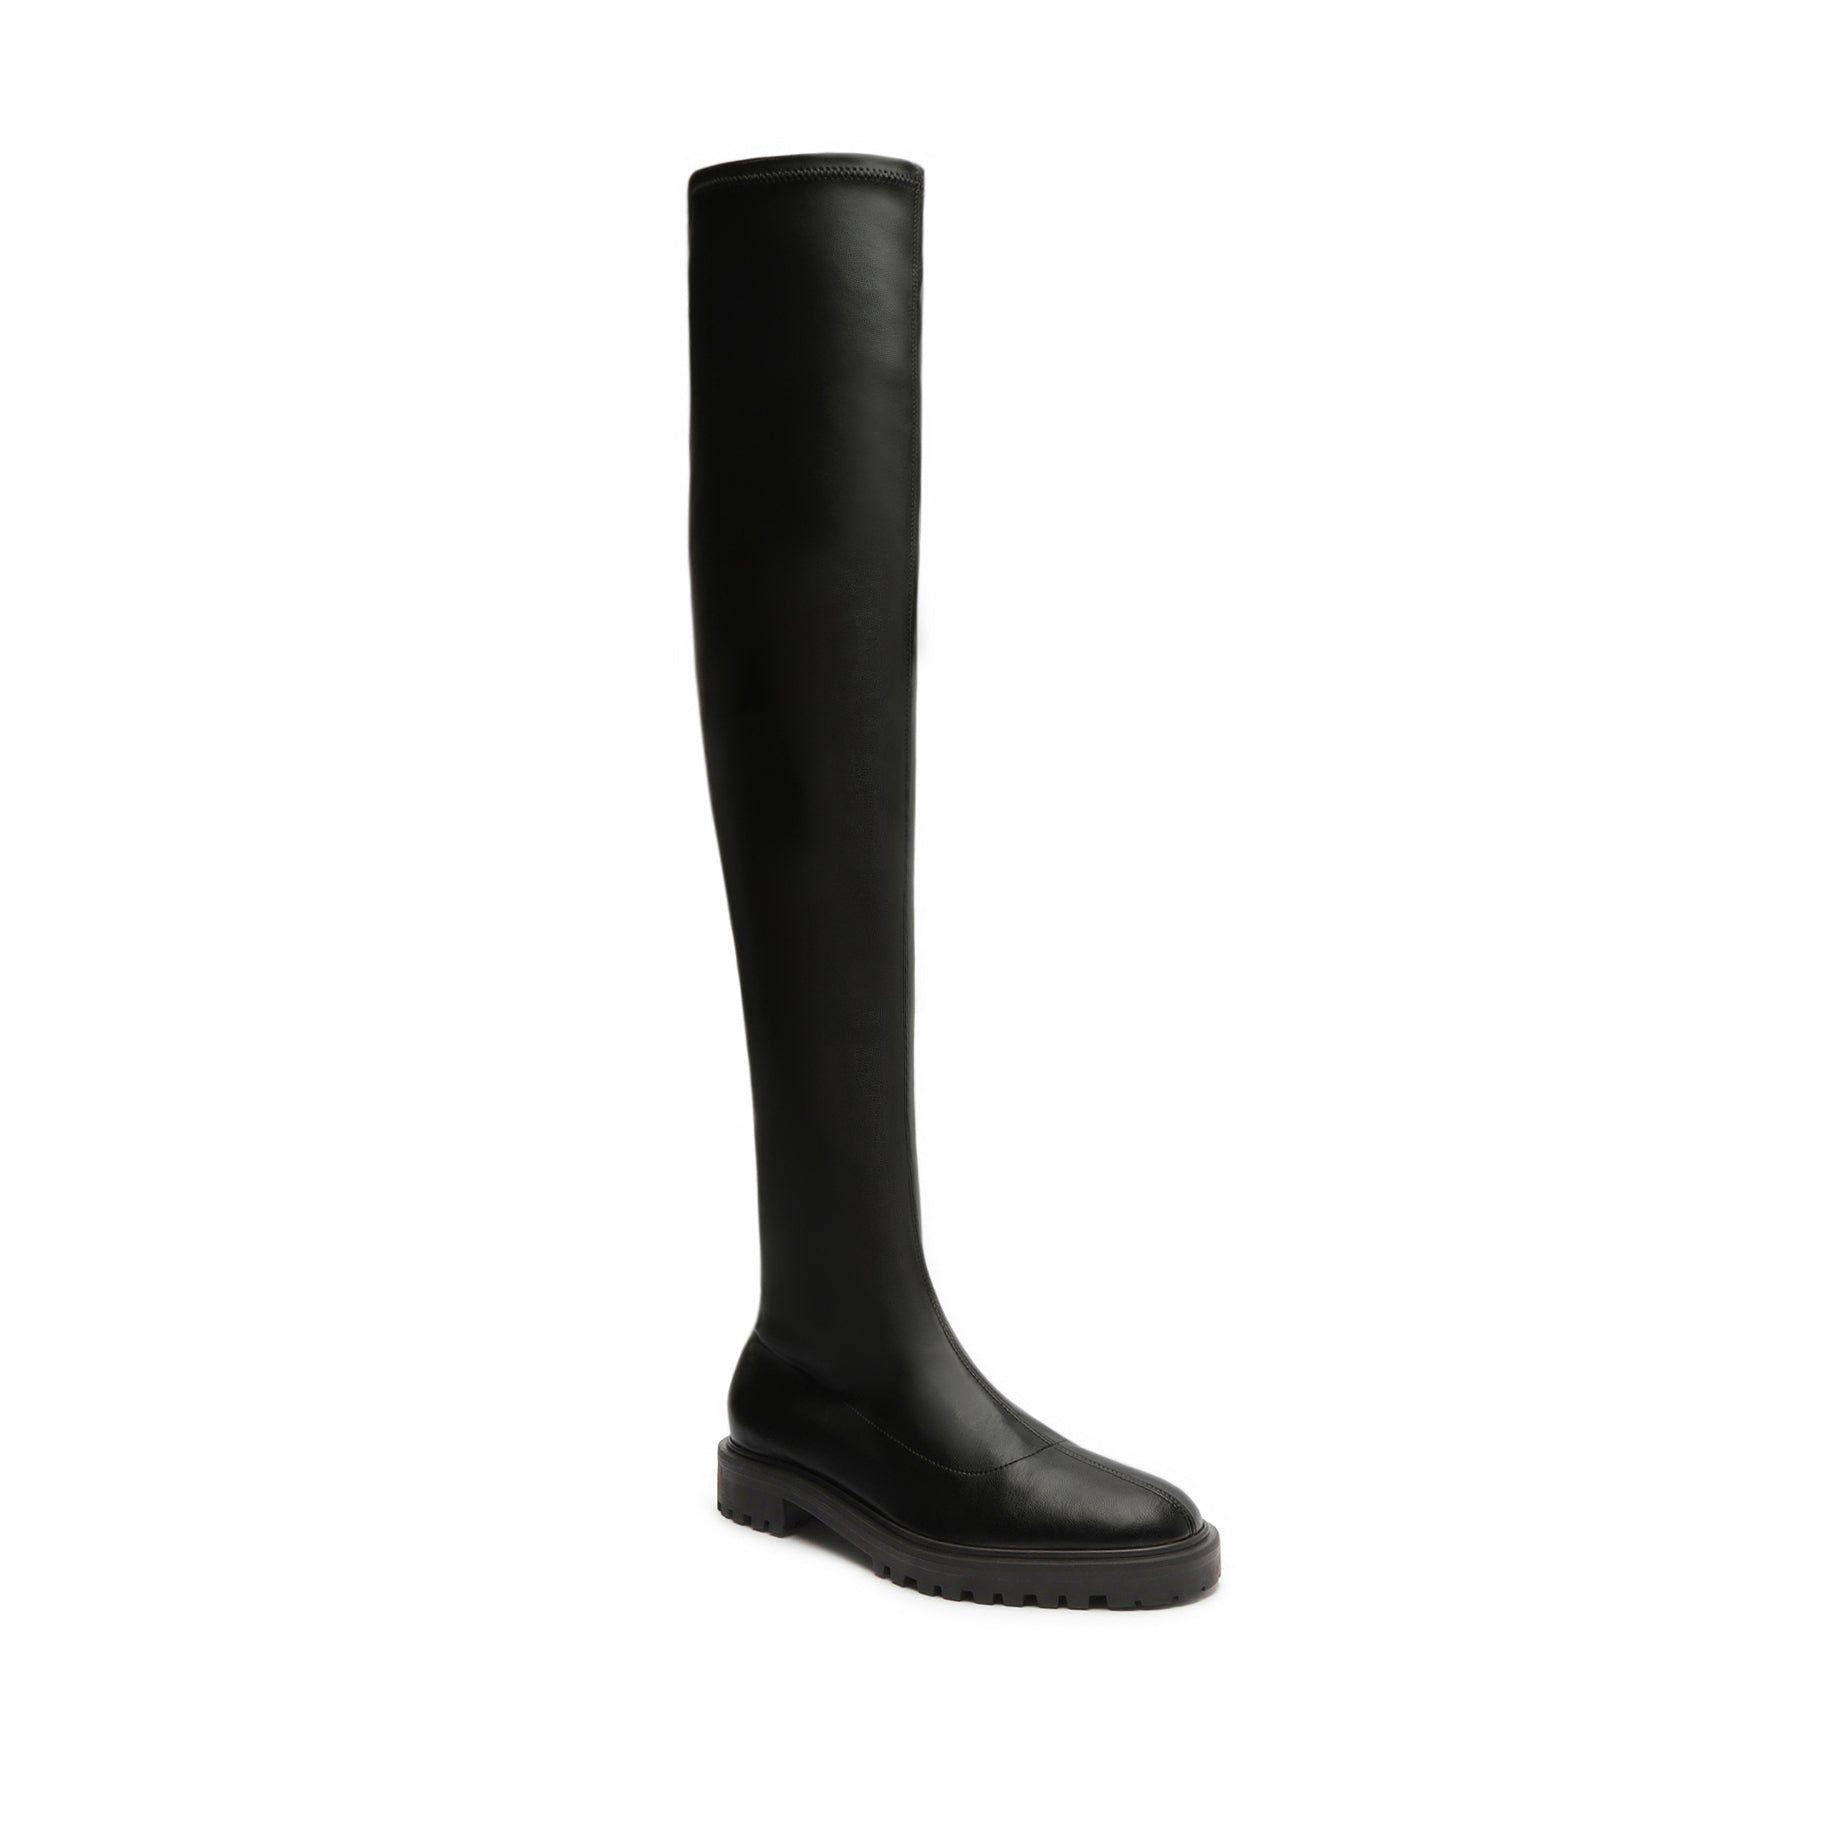 SCHUTZ SHOES Rebel Nappa Leather Boot in Black | Lyst